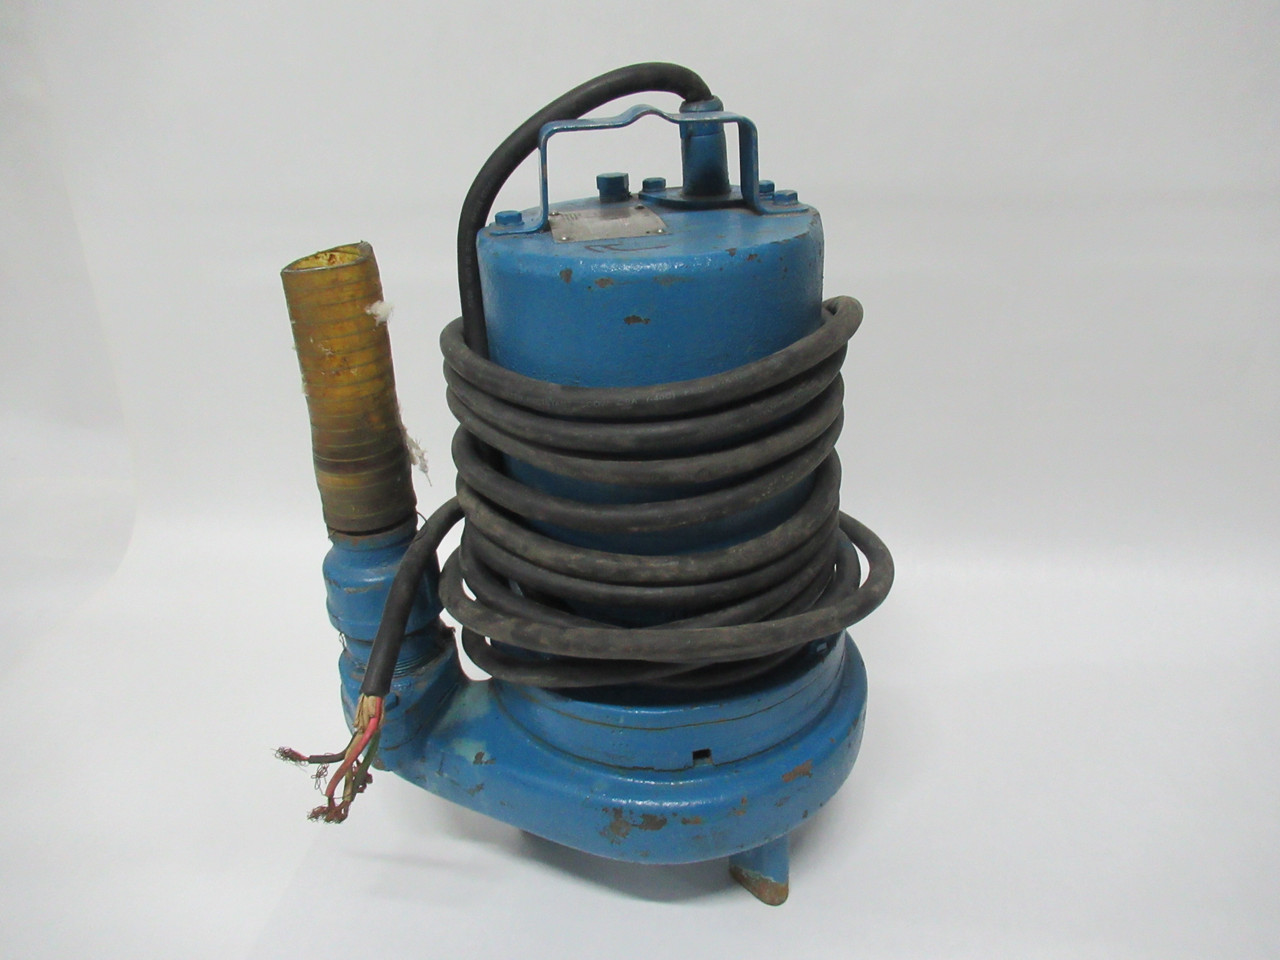 Barnes Submersible Sewage Ejector Pump 2" Ports Steel 1.5HP 600V USED